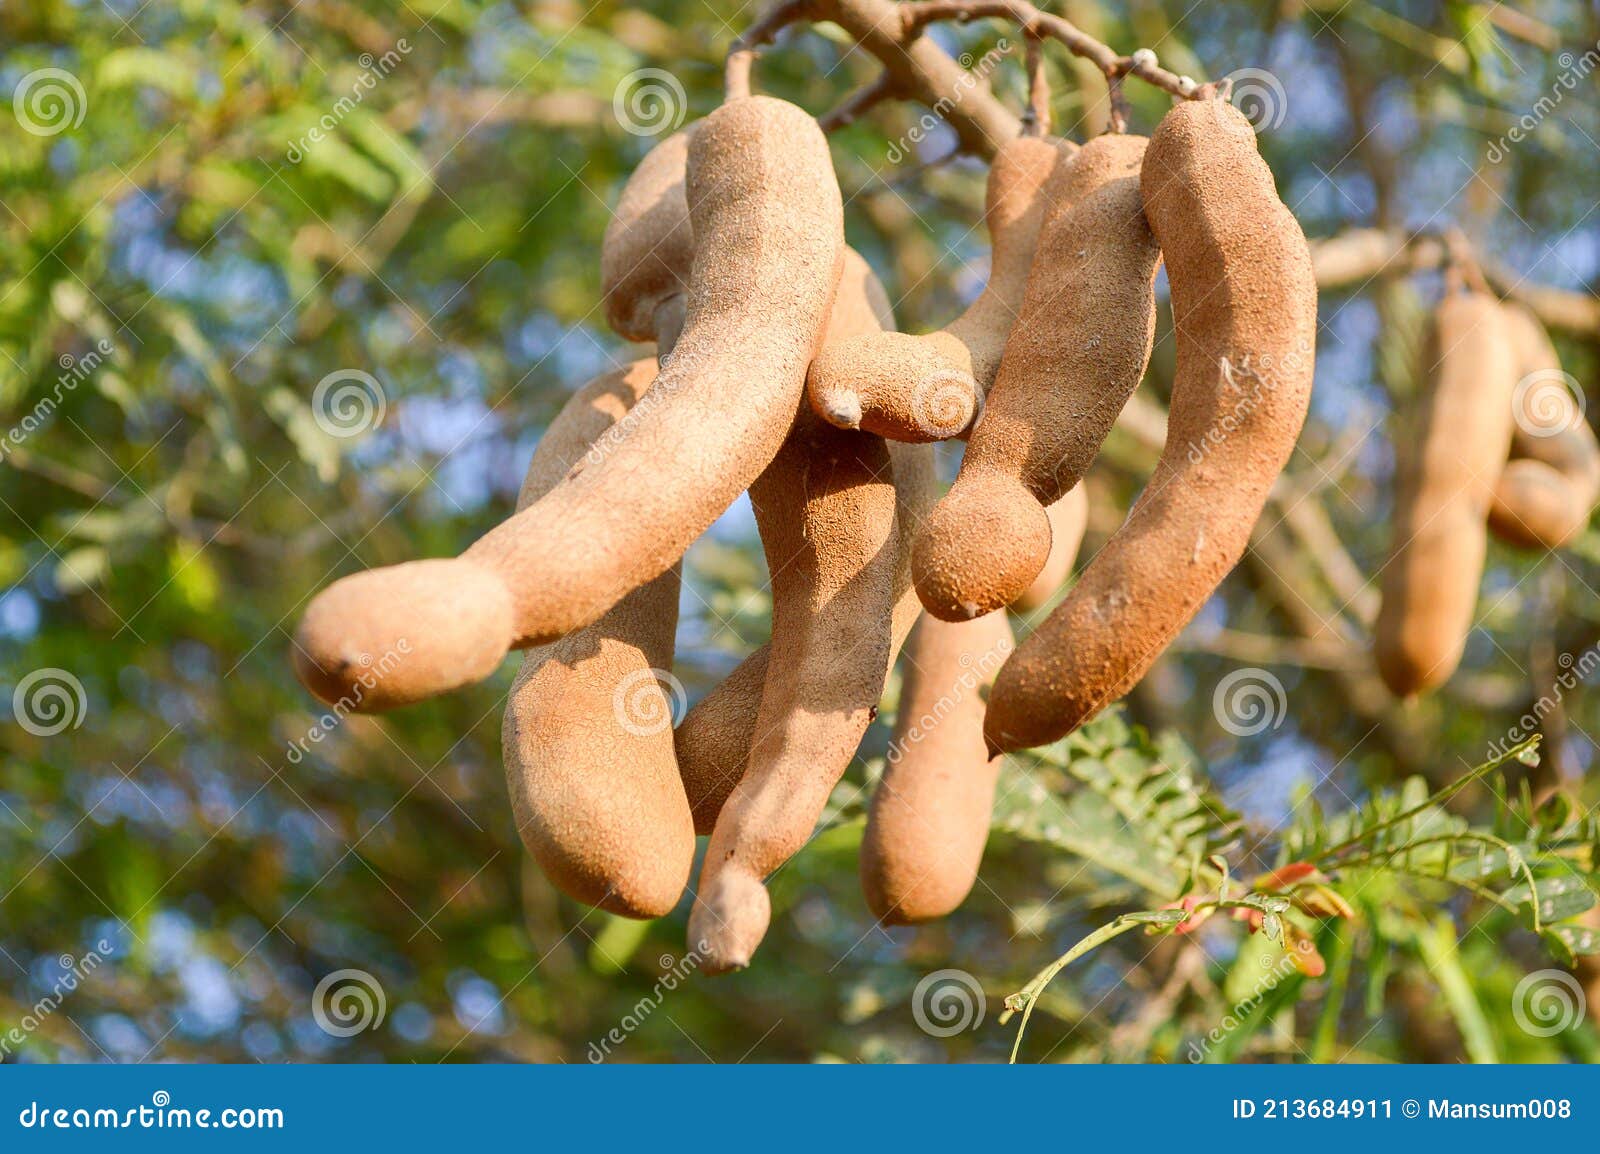 1 158 Tamarindus Indica Photos Free Royalty Free Stock Photos From Dreamstime